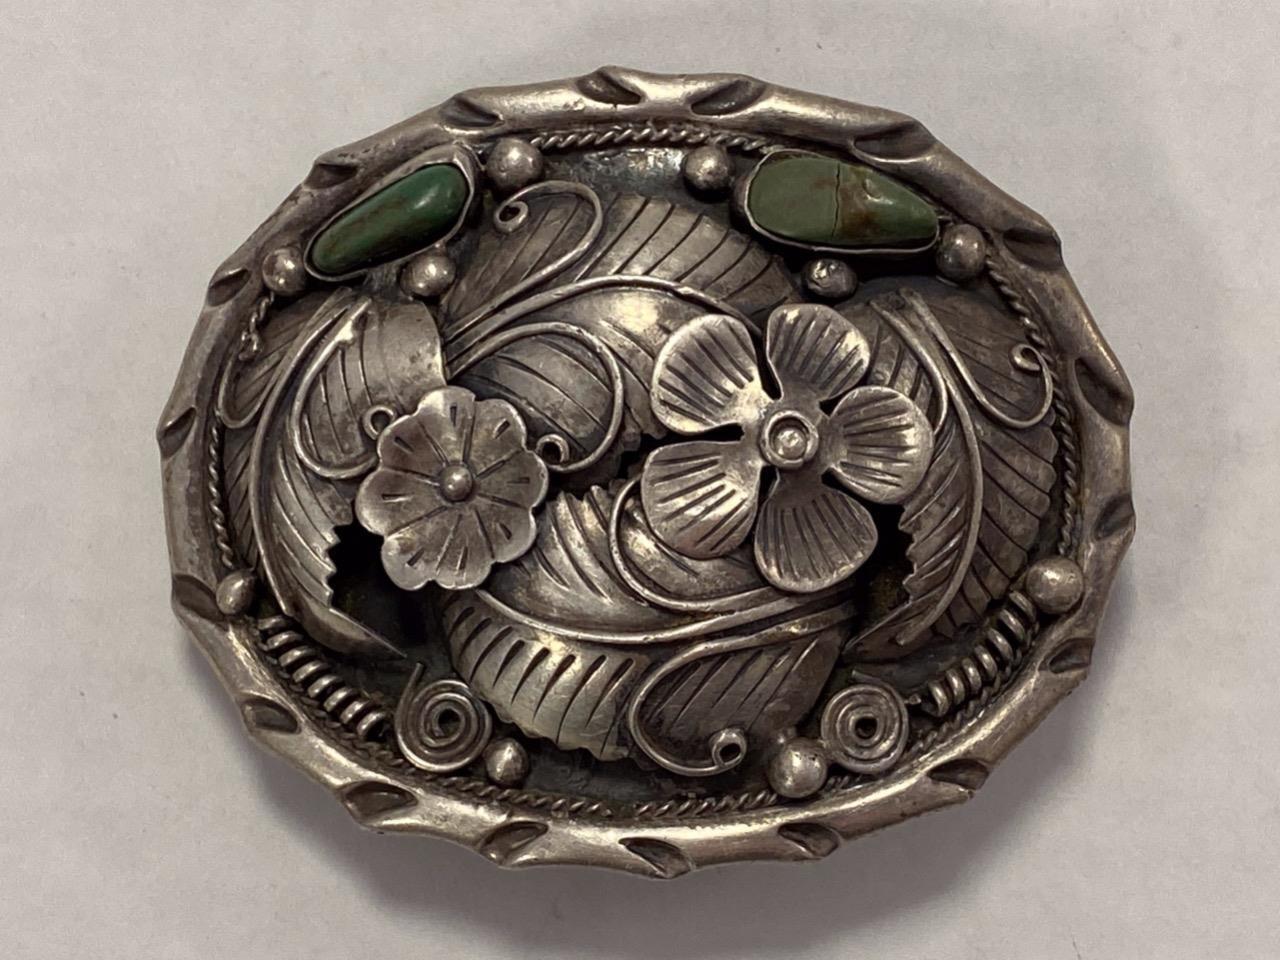 MEXICO 950 SILVER TURQUOISE OXIDIZED BELT BUCKLE (110 GRAMS).